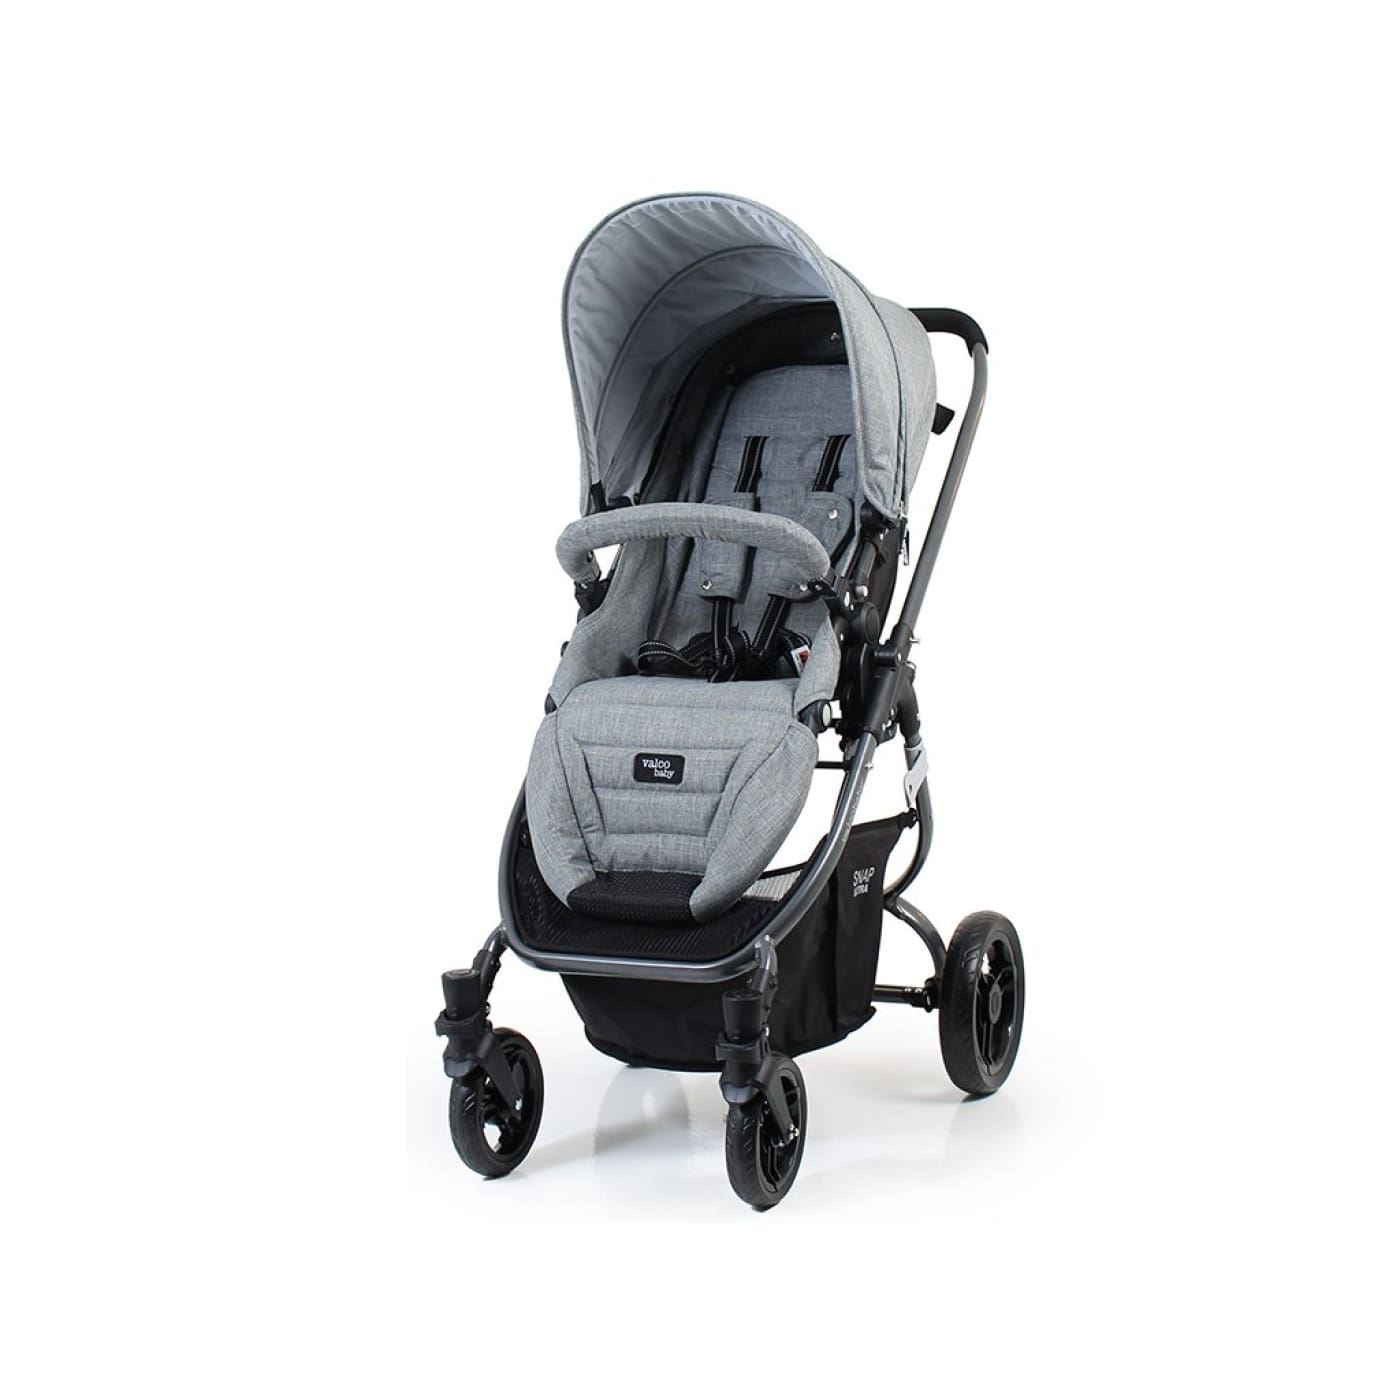 Valco Baby Snap Ultra Tailormade - Grey Marle - PRAMS & STROLLERS - 4 WHEEL TSC